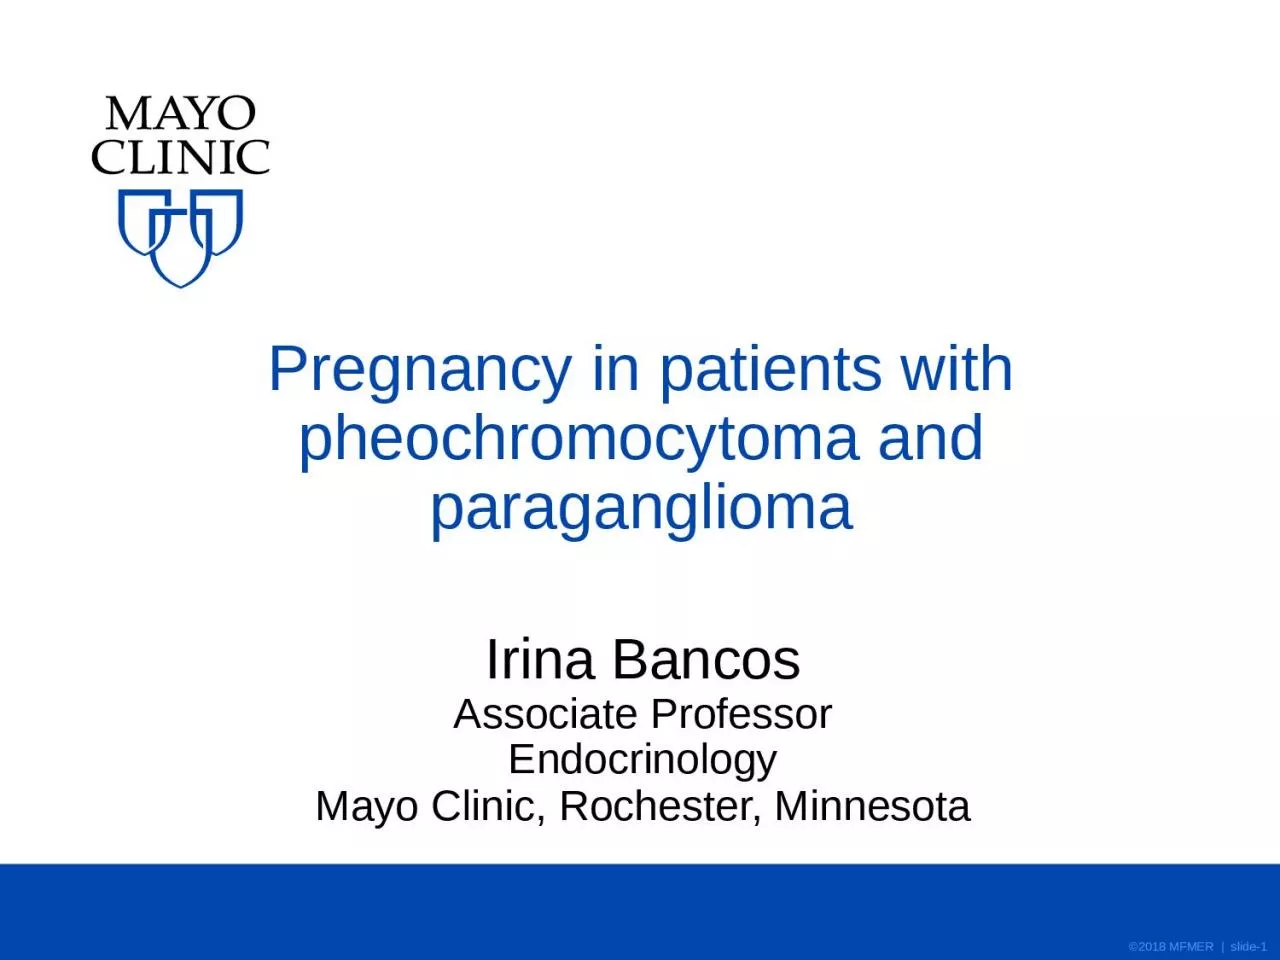 Pregnancy in patients with pheochromocytoma and paraganglioma